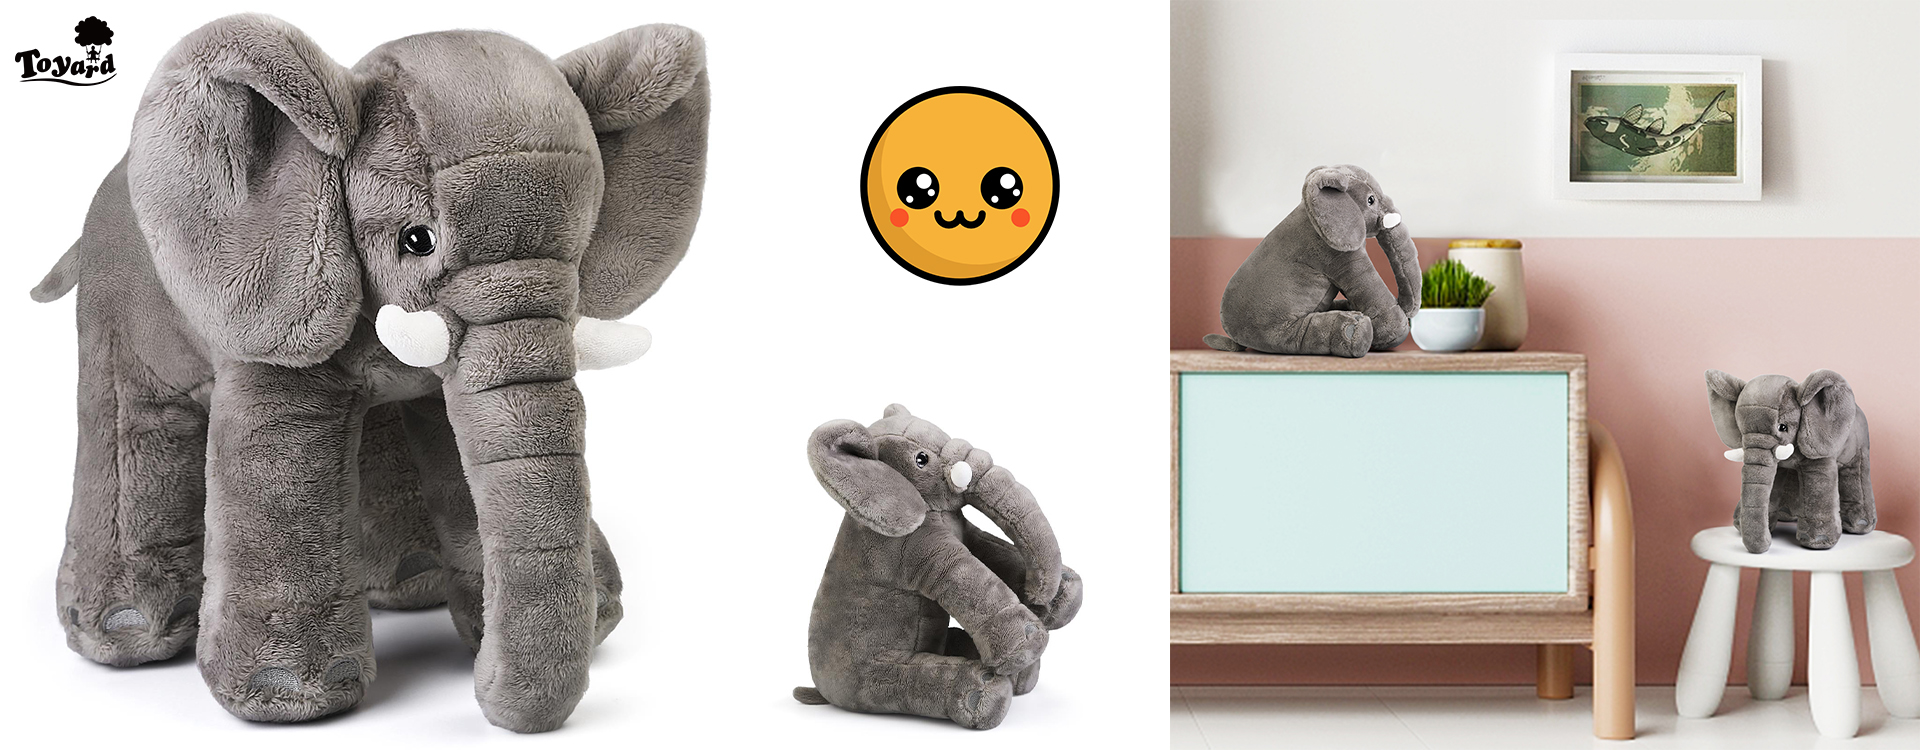 Why Ordered Cute Stuffed Elephant Toy from Plush Manufacturer